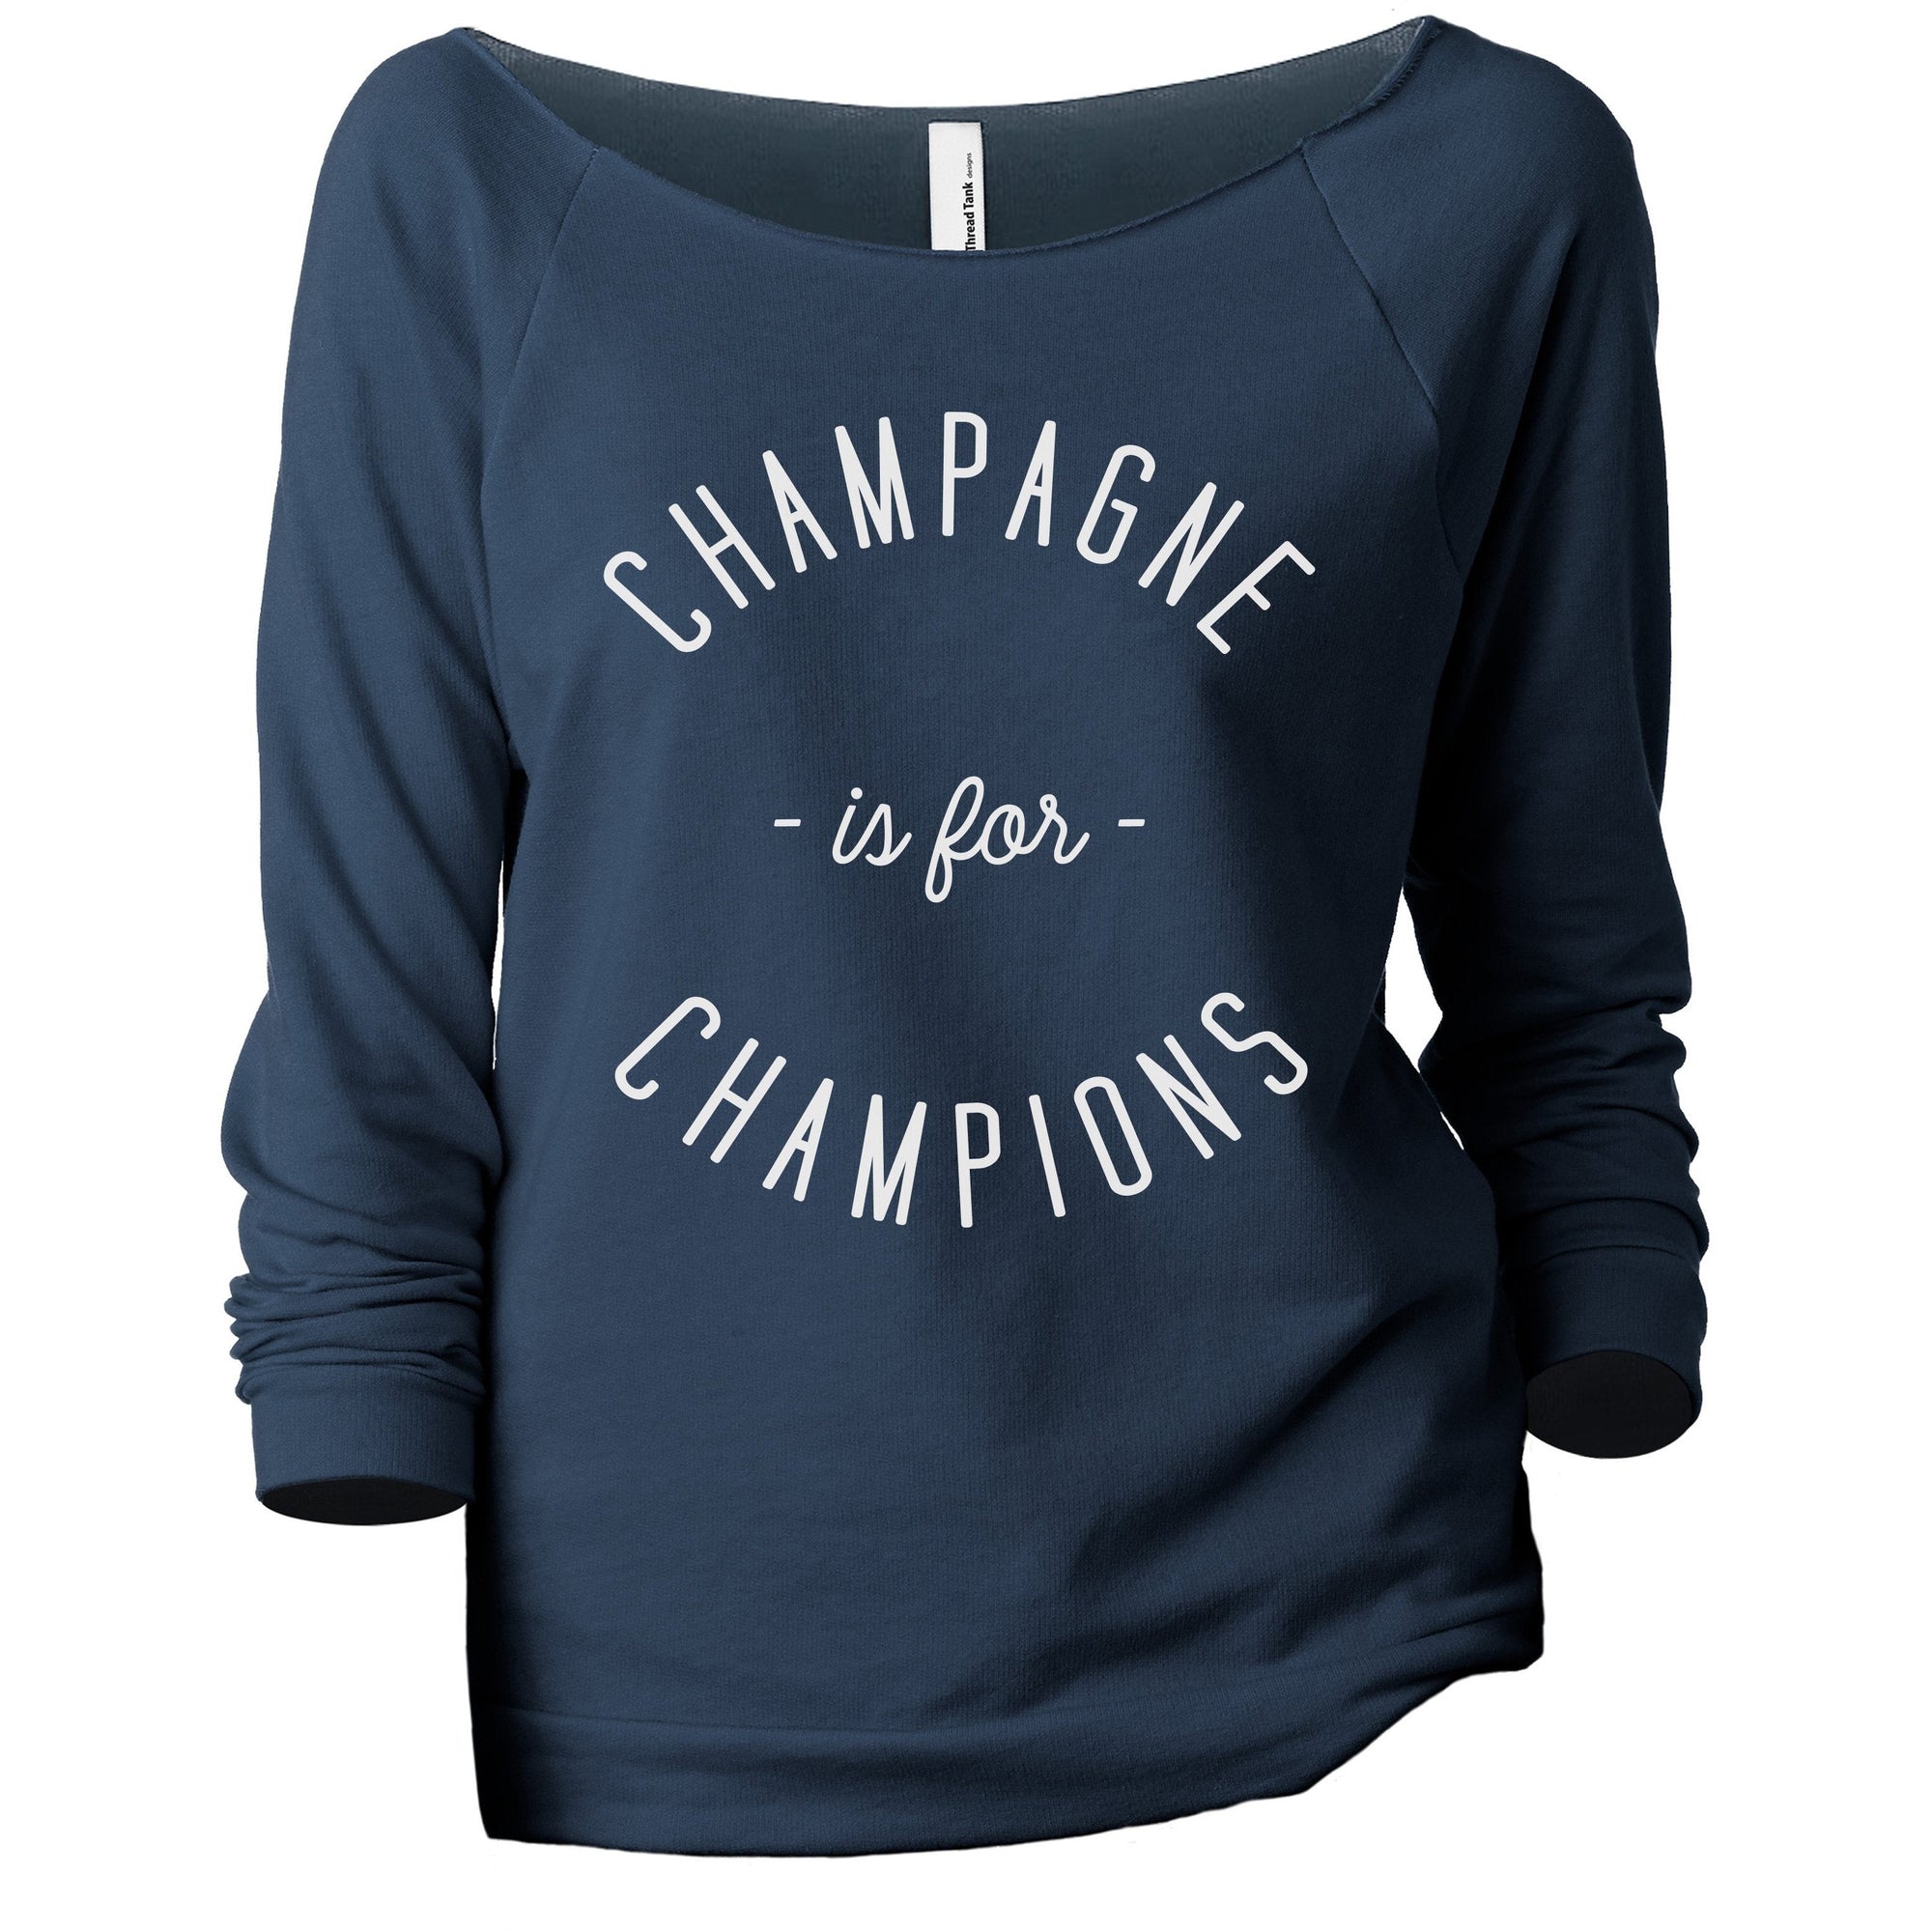 Champagne Is For Champions Women's Graphic Printed Lightweight Slouchy 3/4 Sleeves Sweatshirt Navy